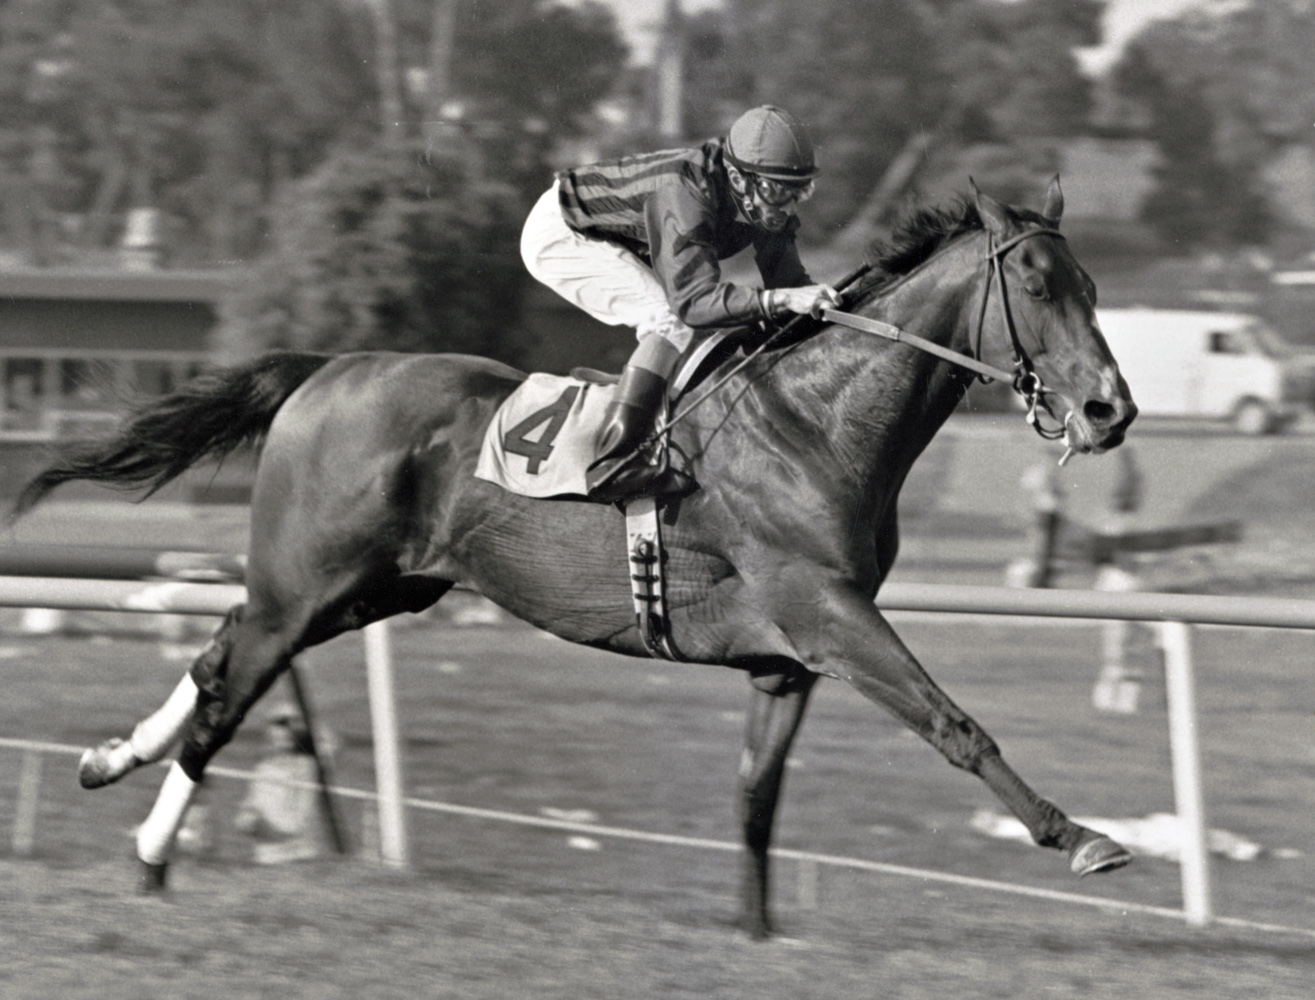 Manila (Fernando Toro up) winning the 1986 Cinema Handicap at Hollywood Park (Keeneland Library Thoroughbred Times Collection)